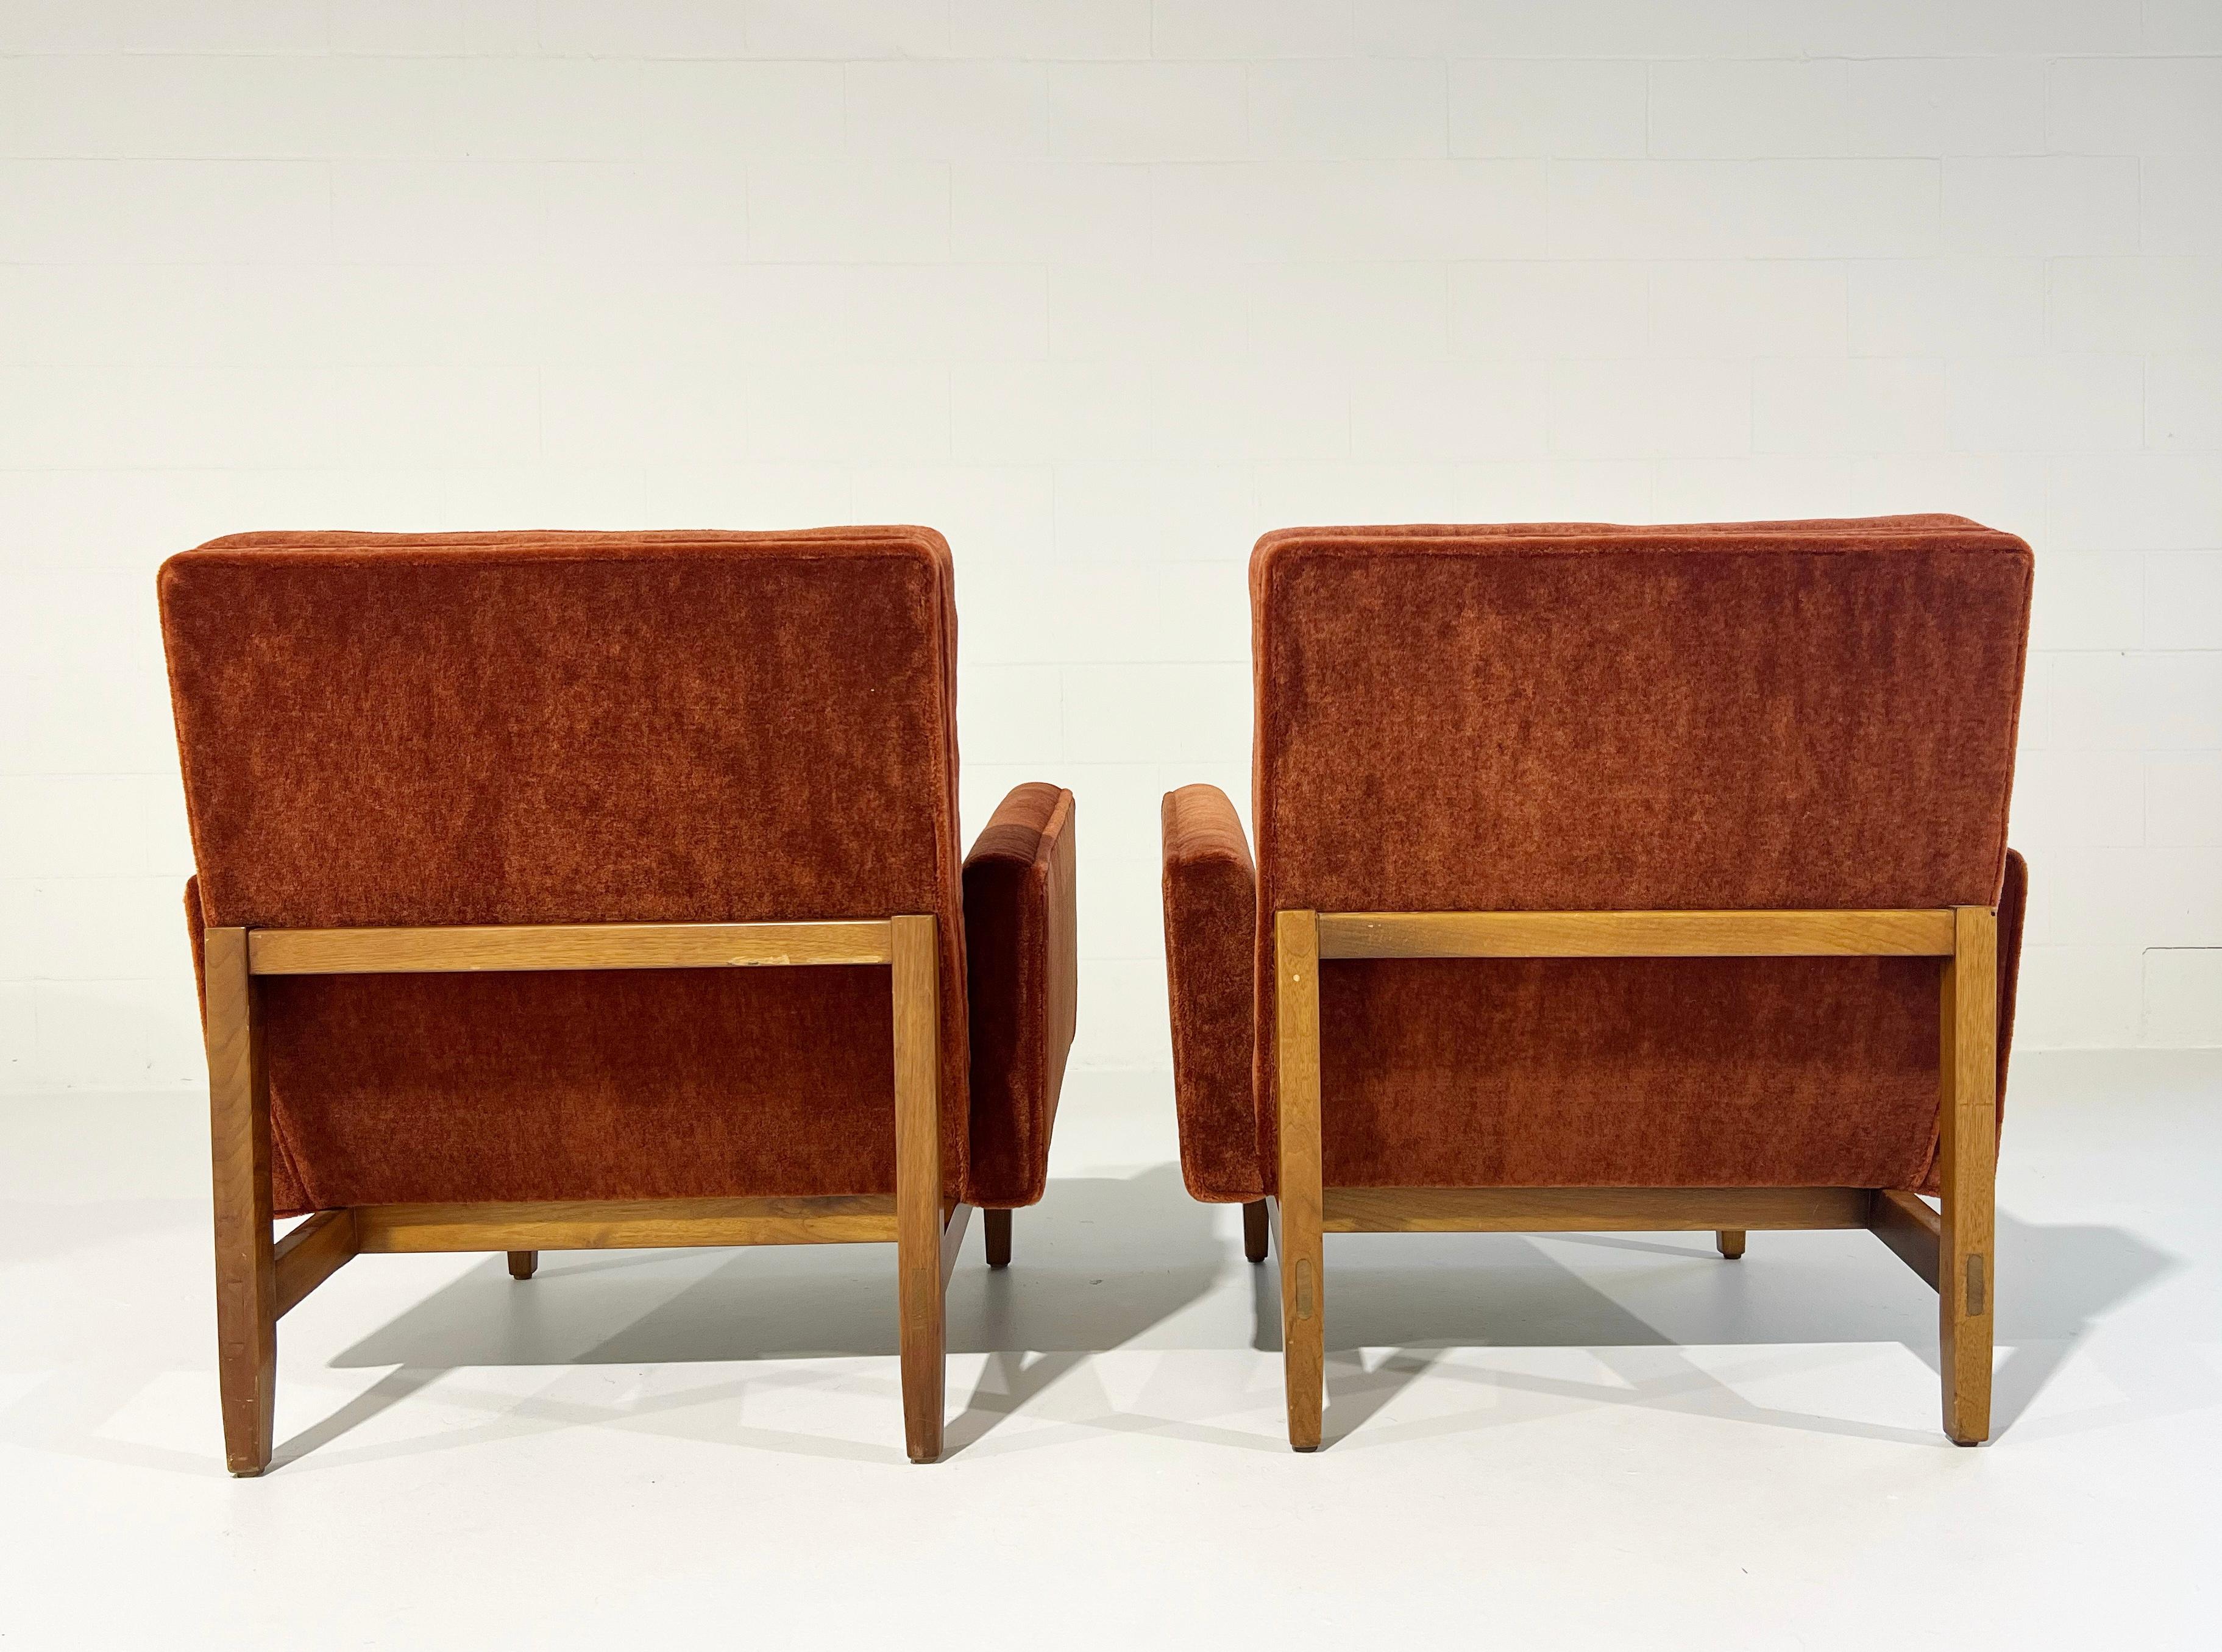 American Vintage Restored Florence Knoll Armchairs in Pierre Frey Teddy Mohair For Sale